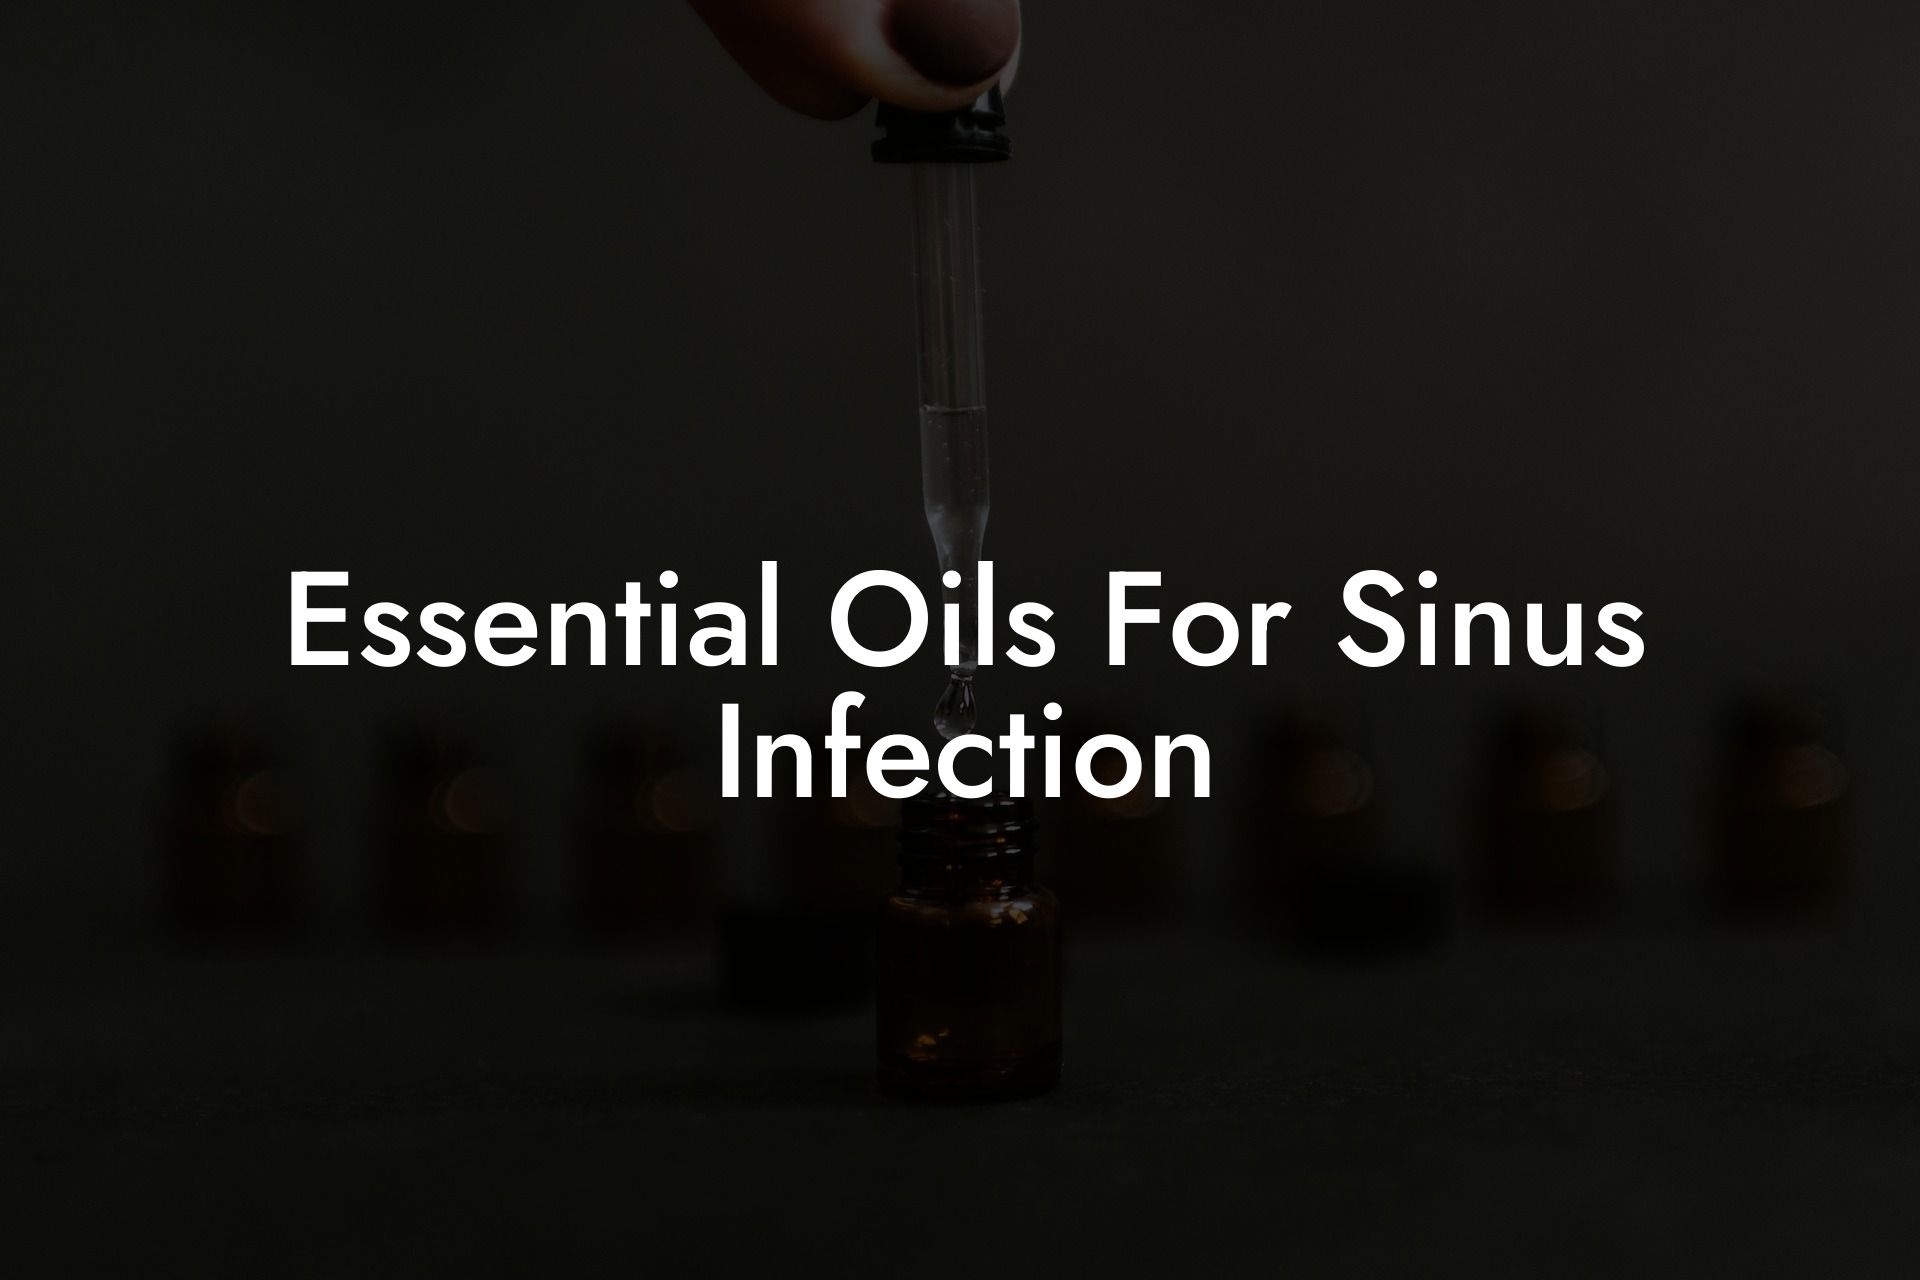 Essential Oils For Sinus Infection